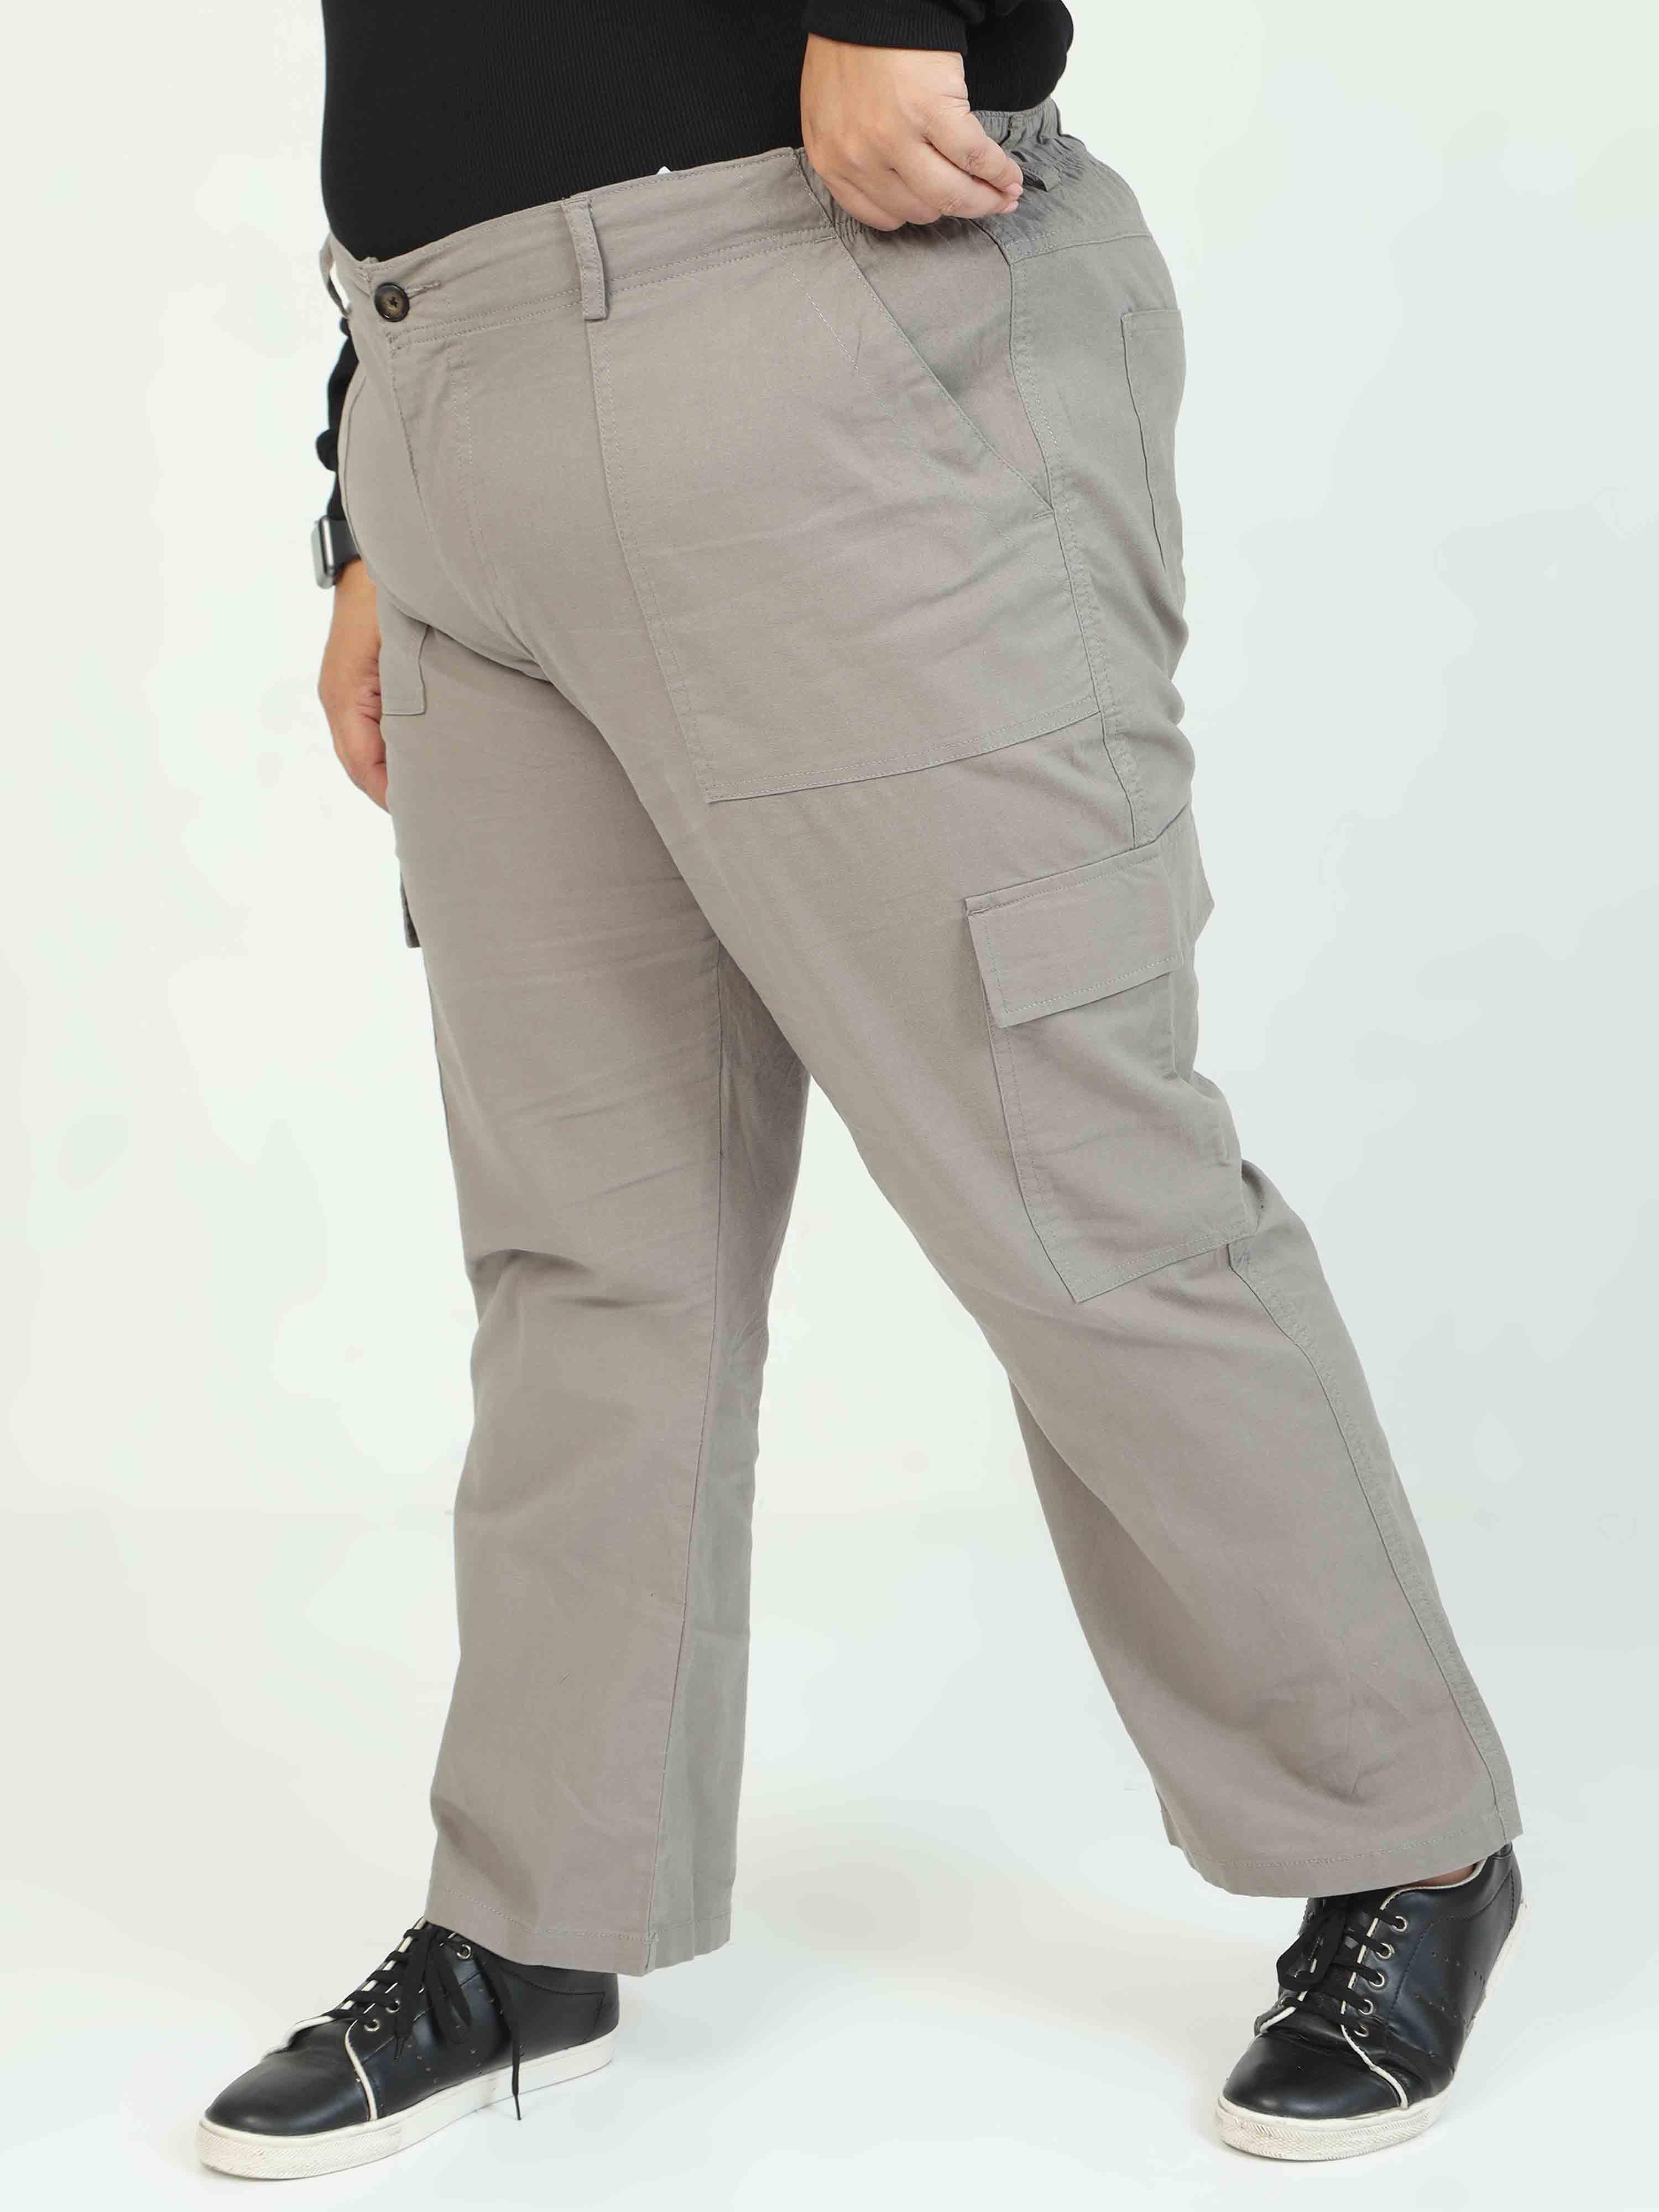 Buy Hiltl Khaki Solid Formal trousers Online - 526090 | The Collective